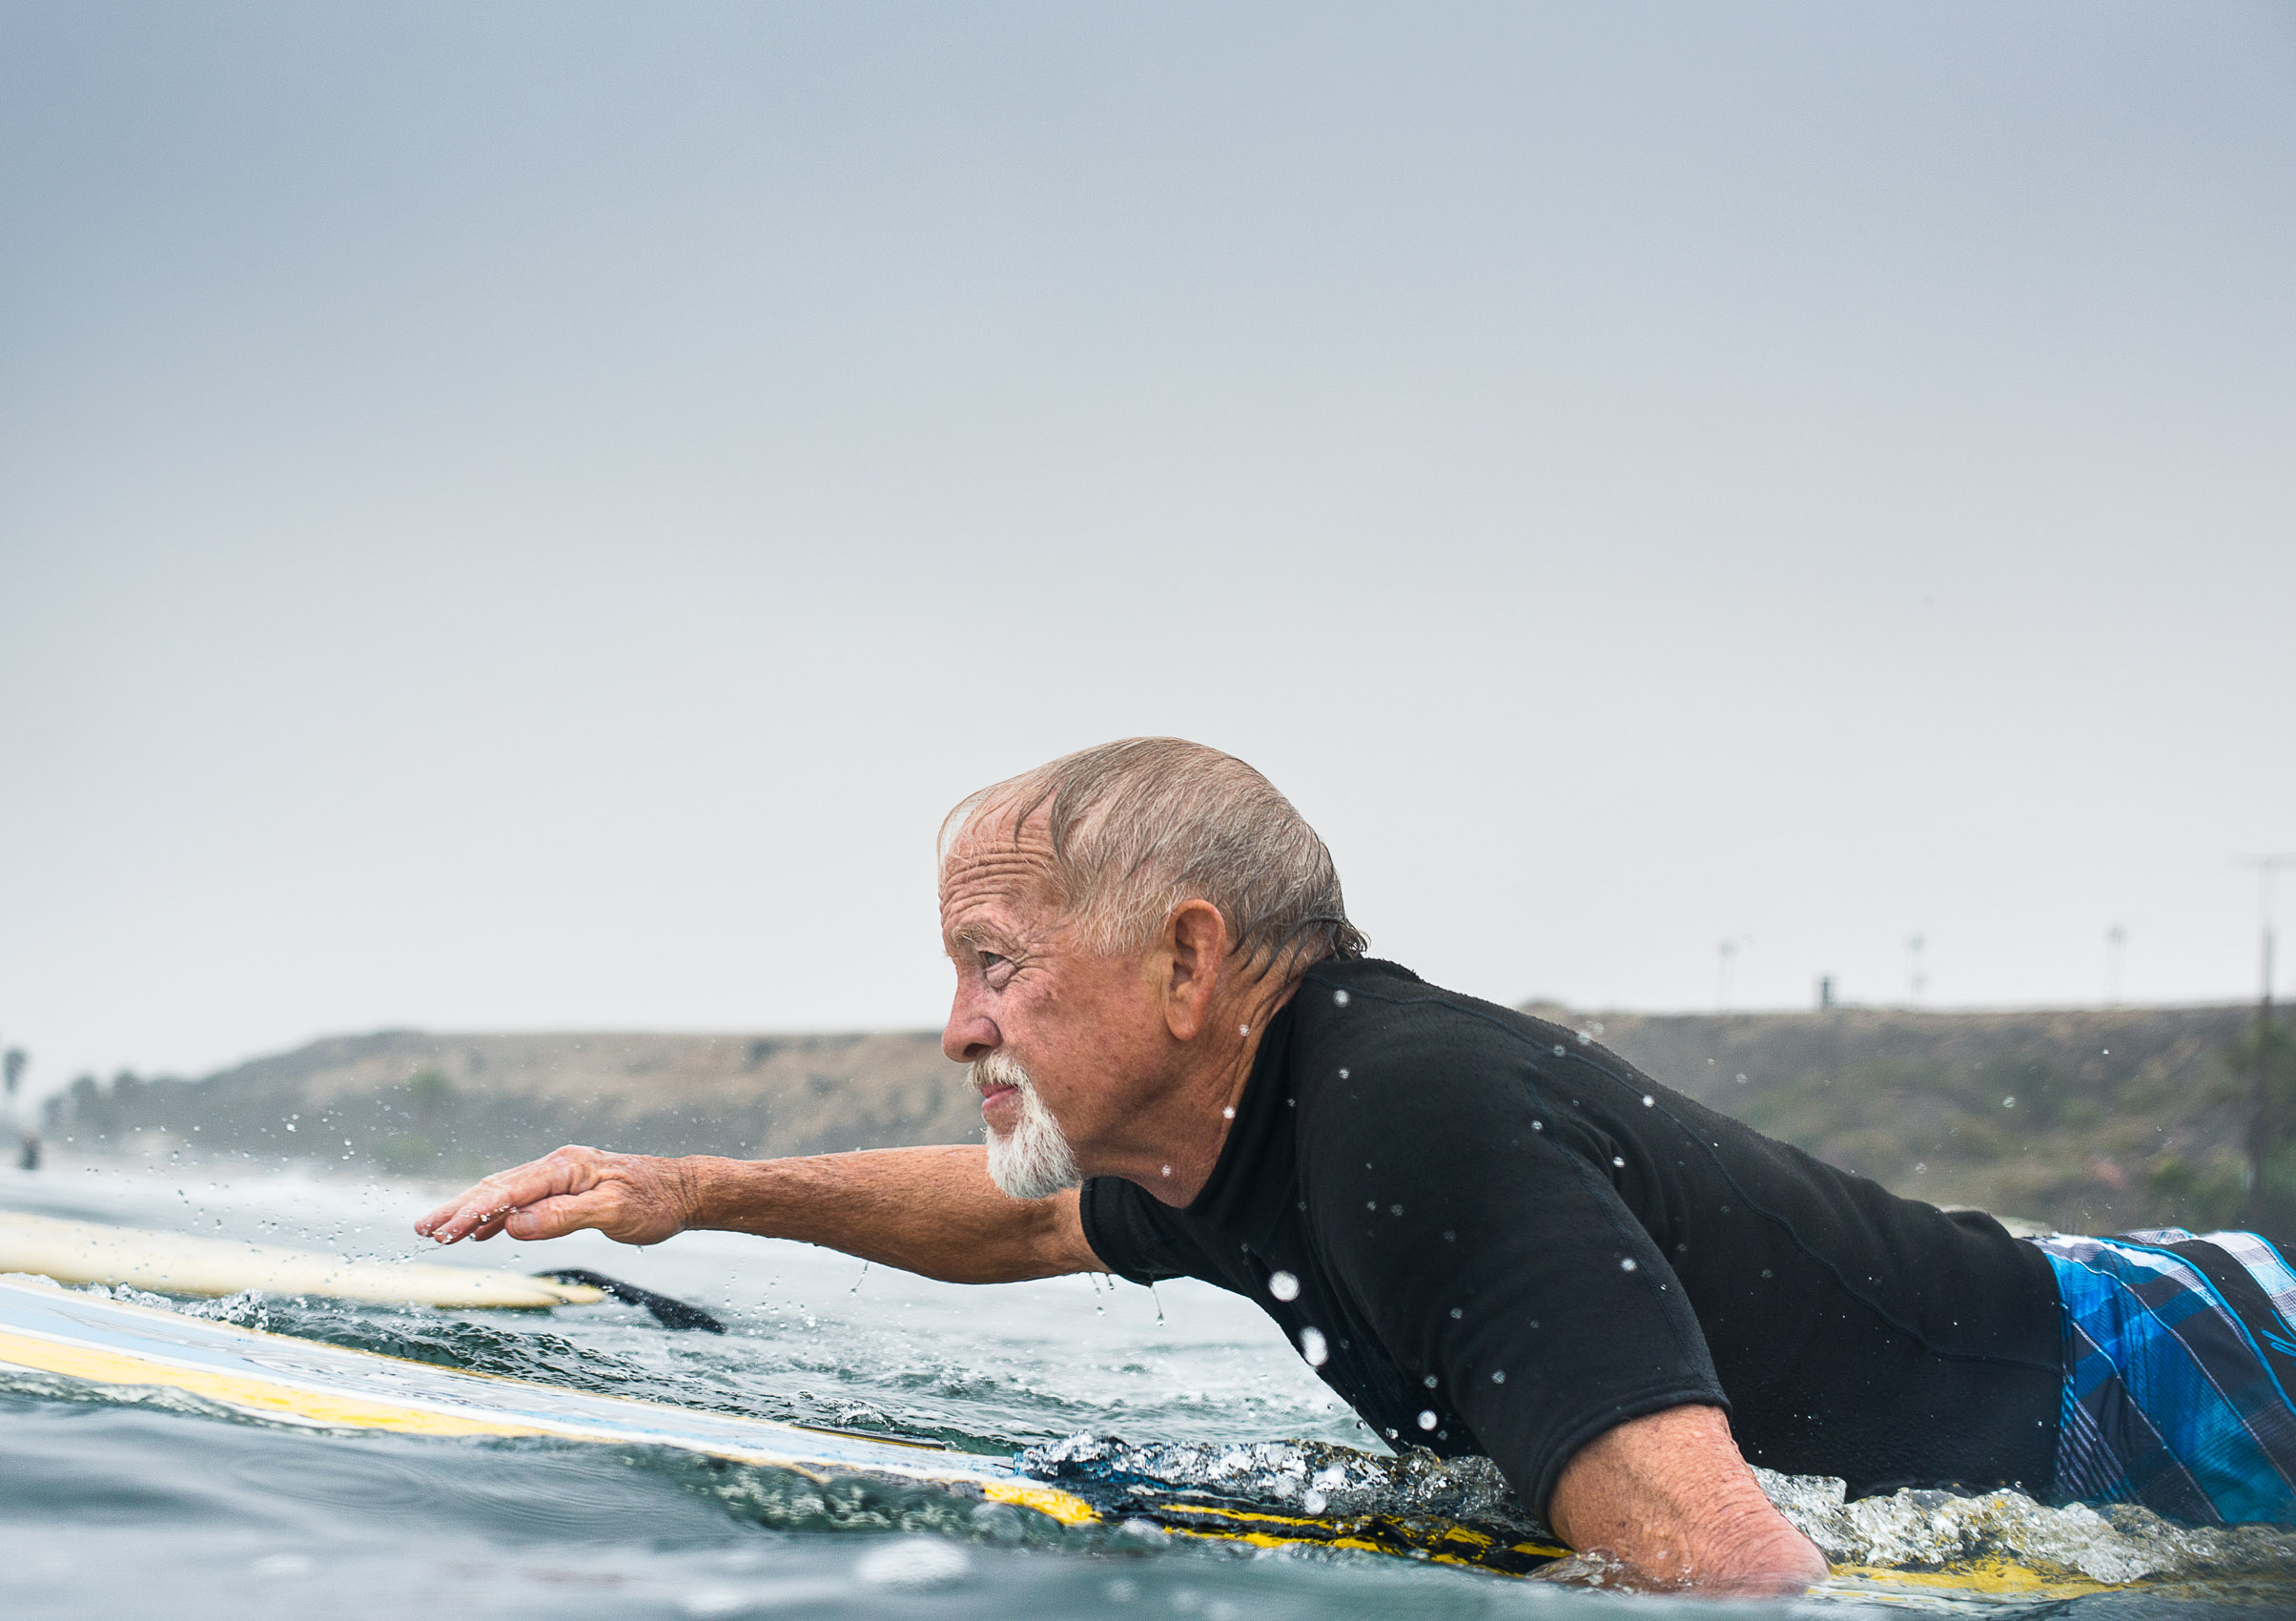 A senior surfer paddles out at San Onofre State Beach, San Clemente, Calif.